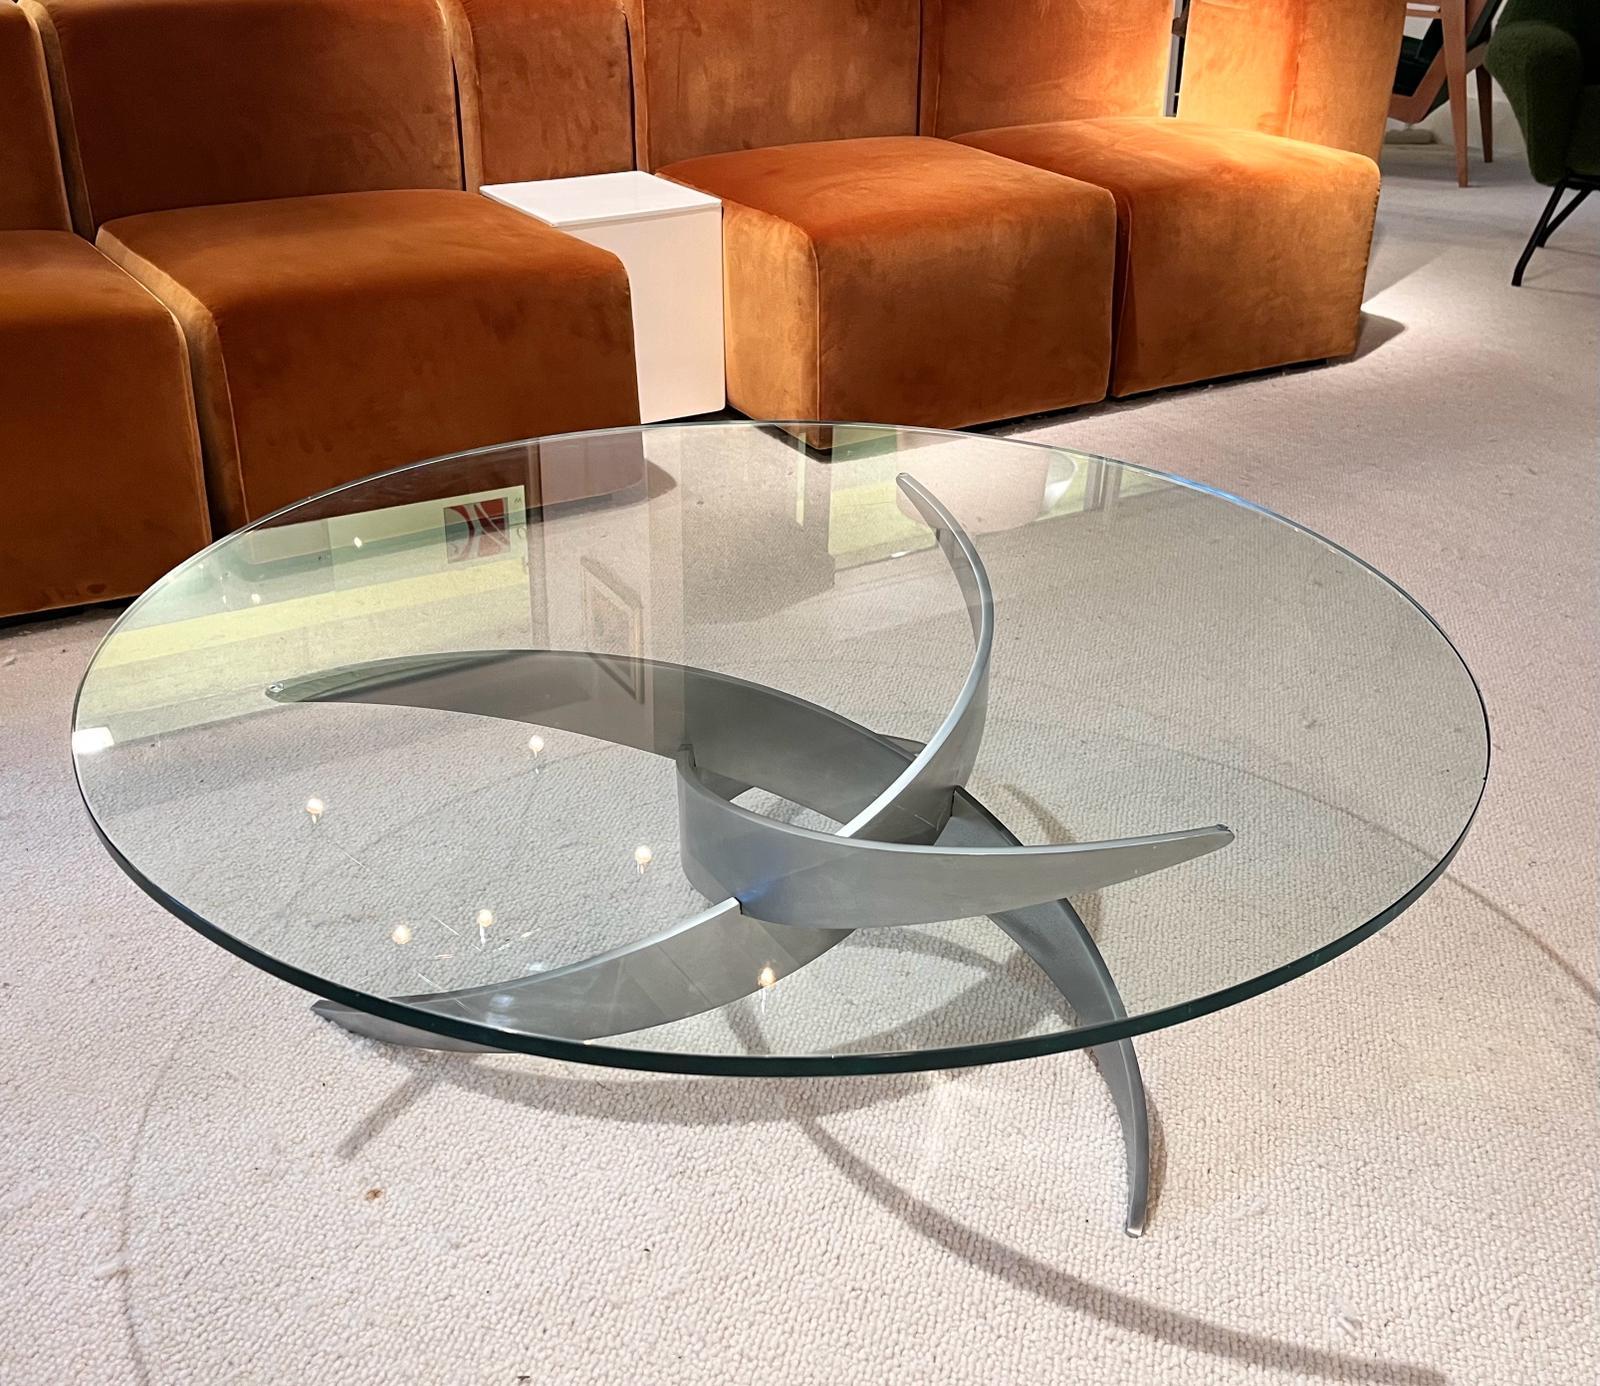 70s Coffee Table